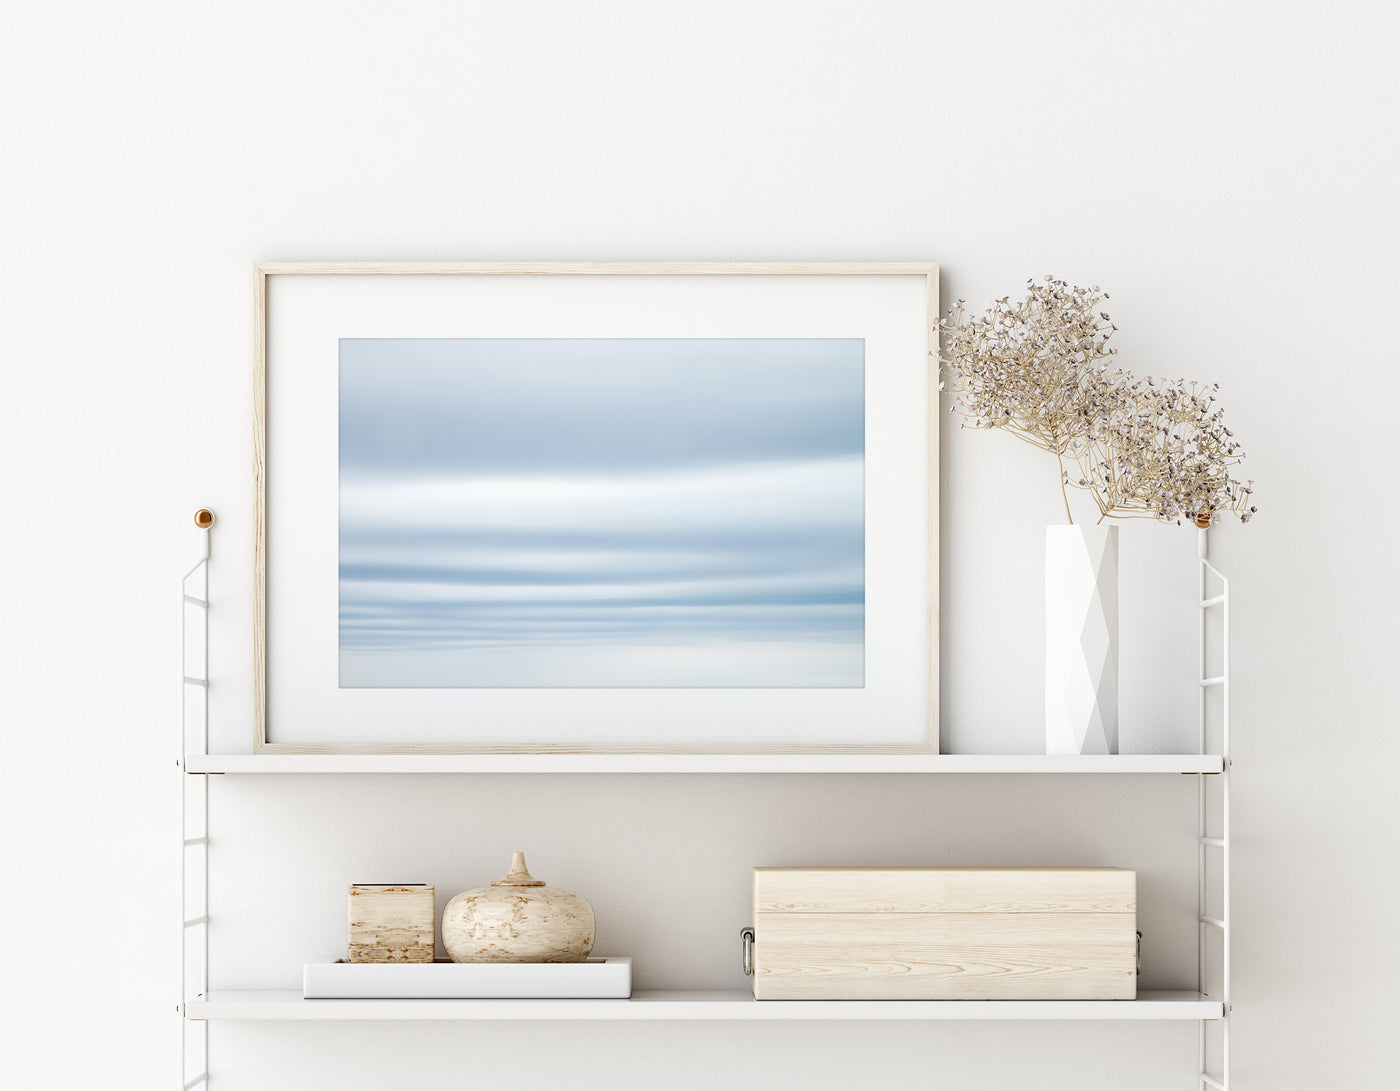 Clouds No 4 - Fine art print by Cattie Coyle Photography on string shelf